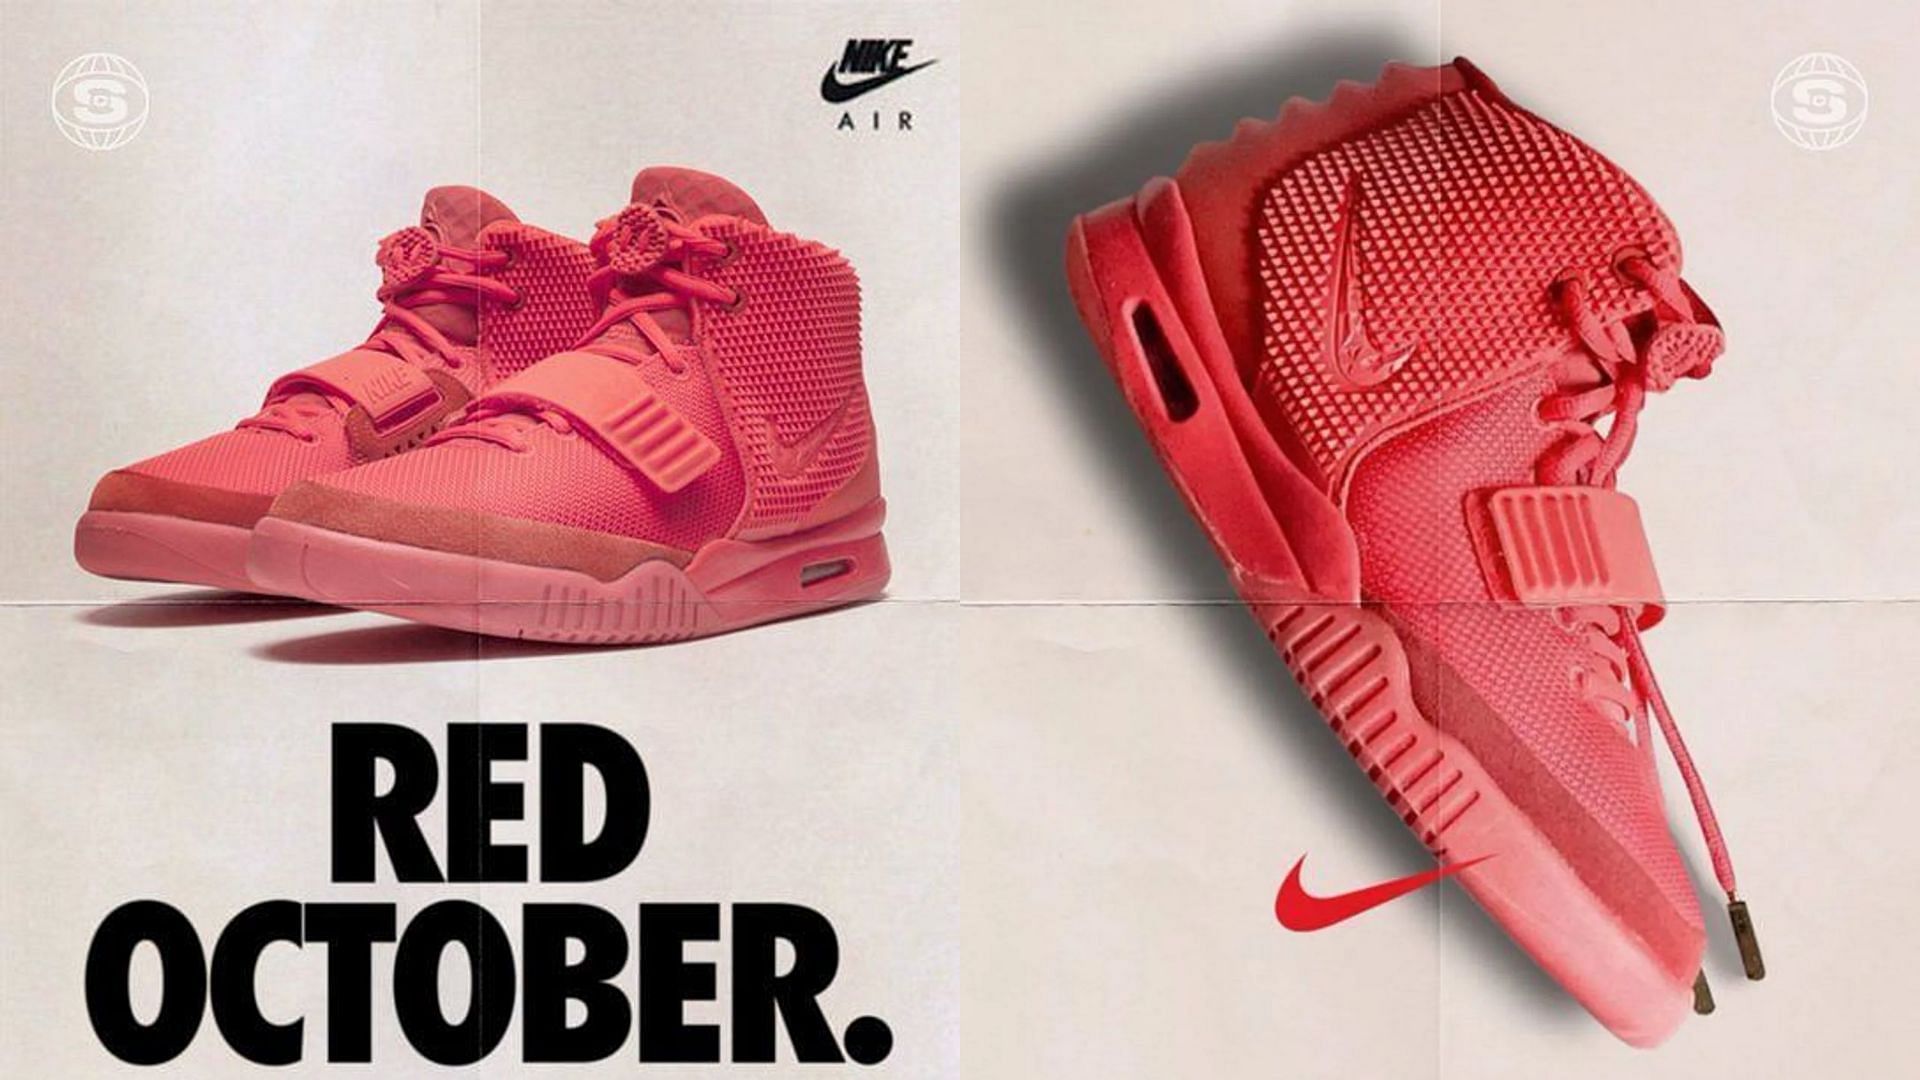 Kanye West Air Yeezy 2 Red October (Image via @solecollection / Twitter)